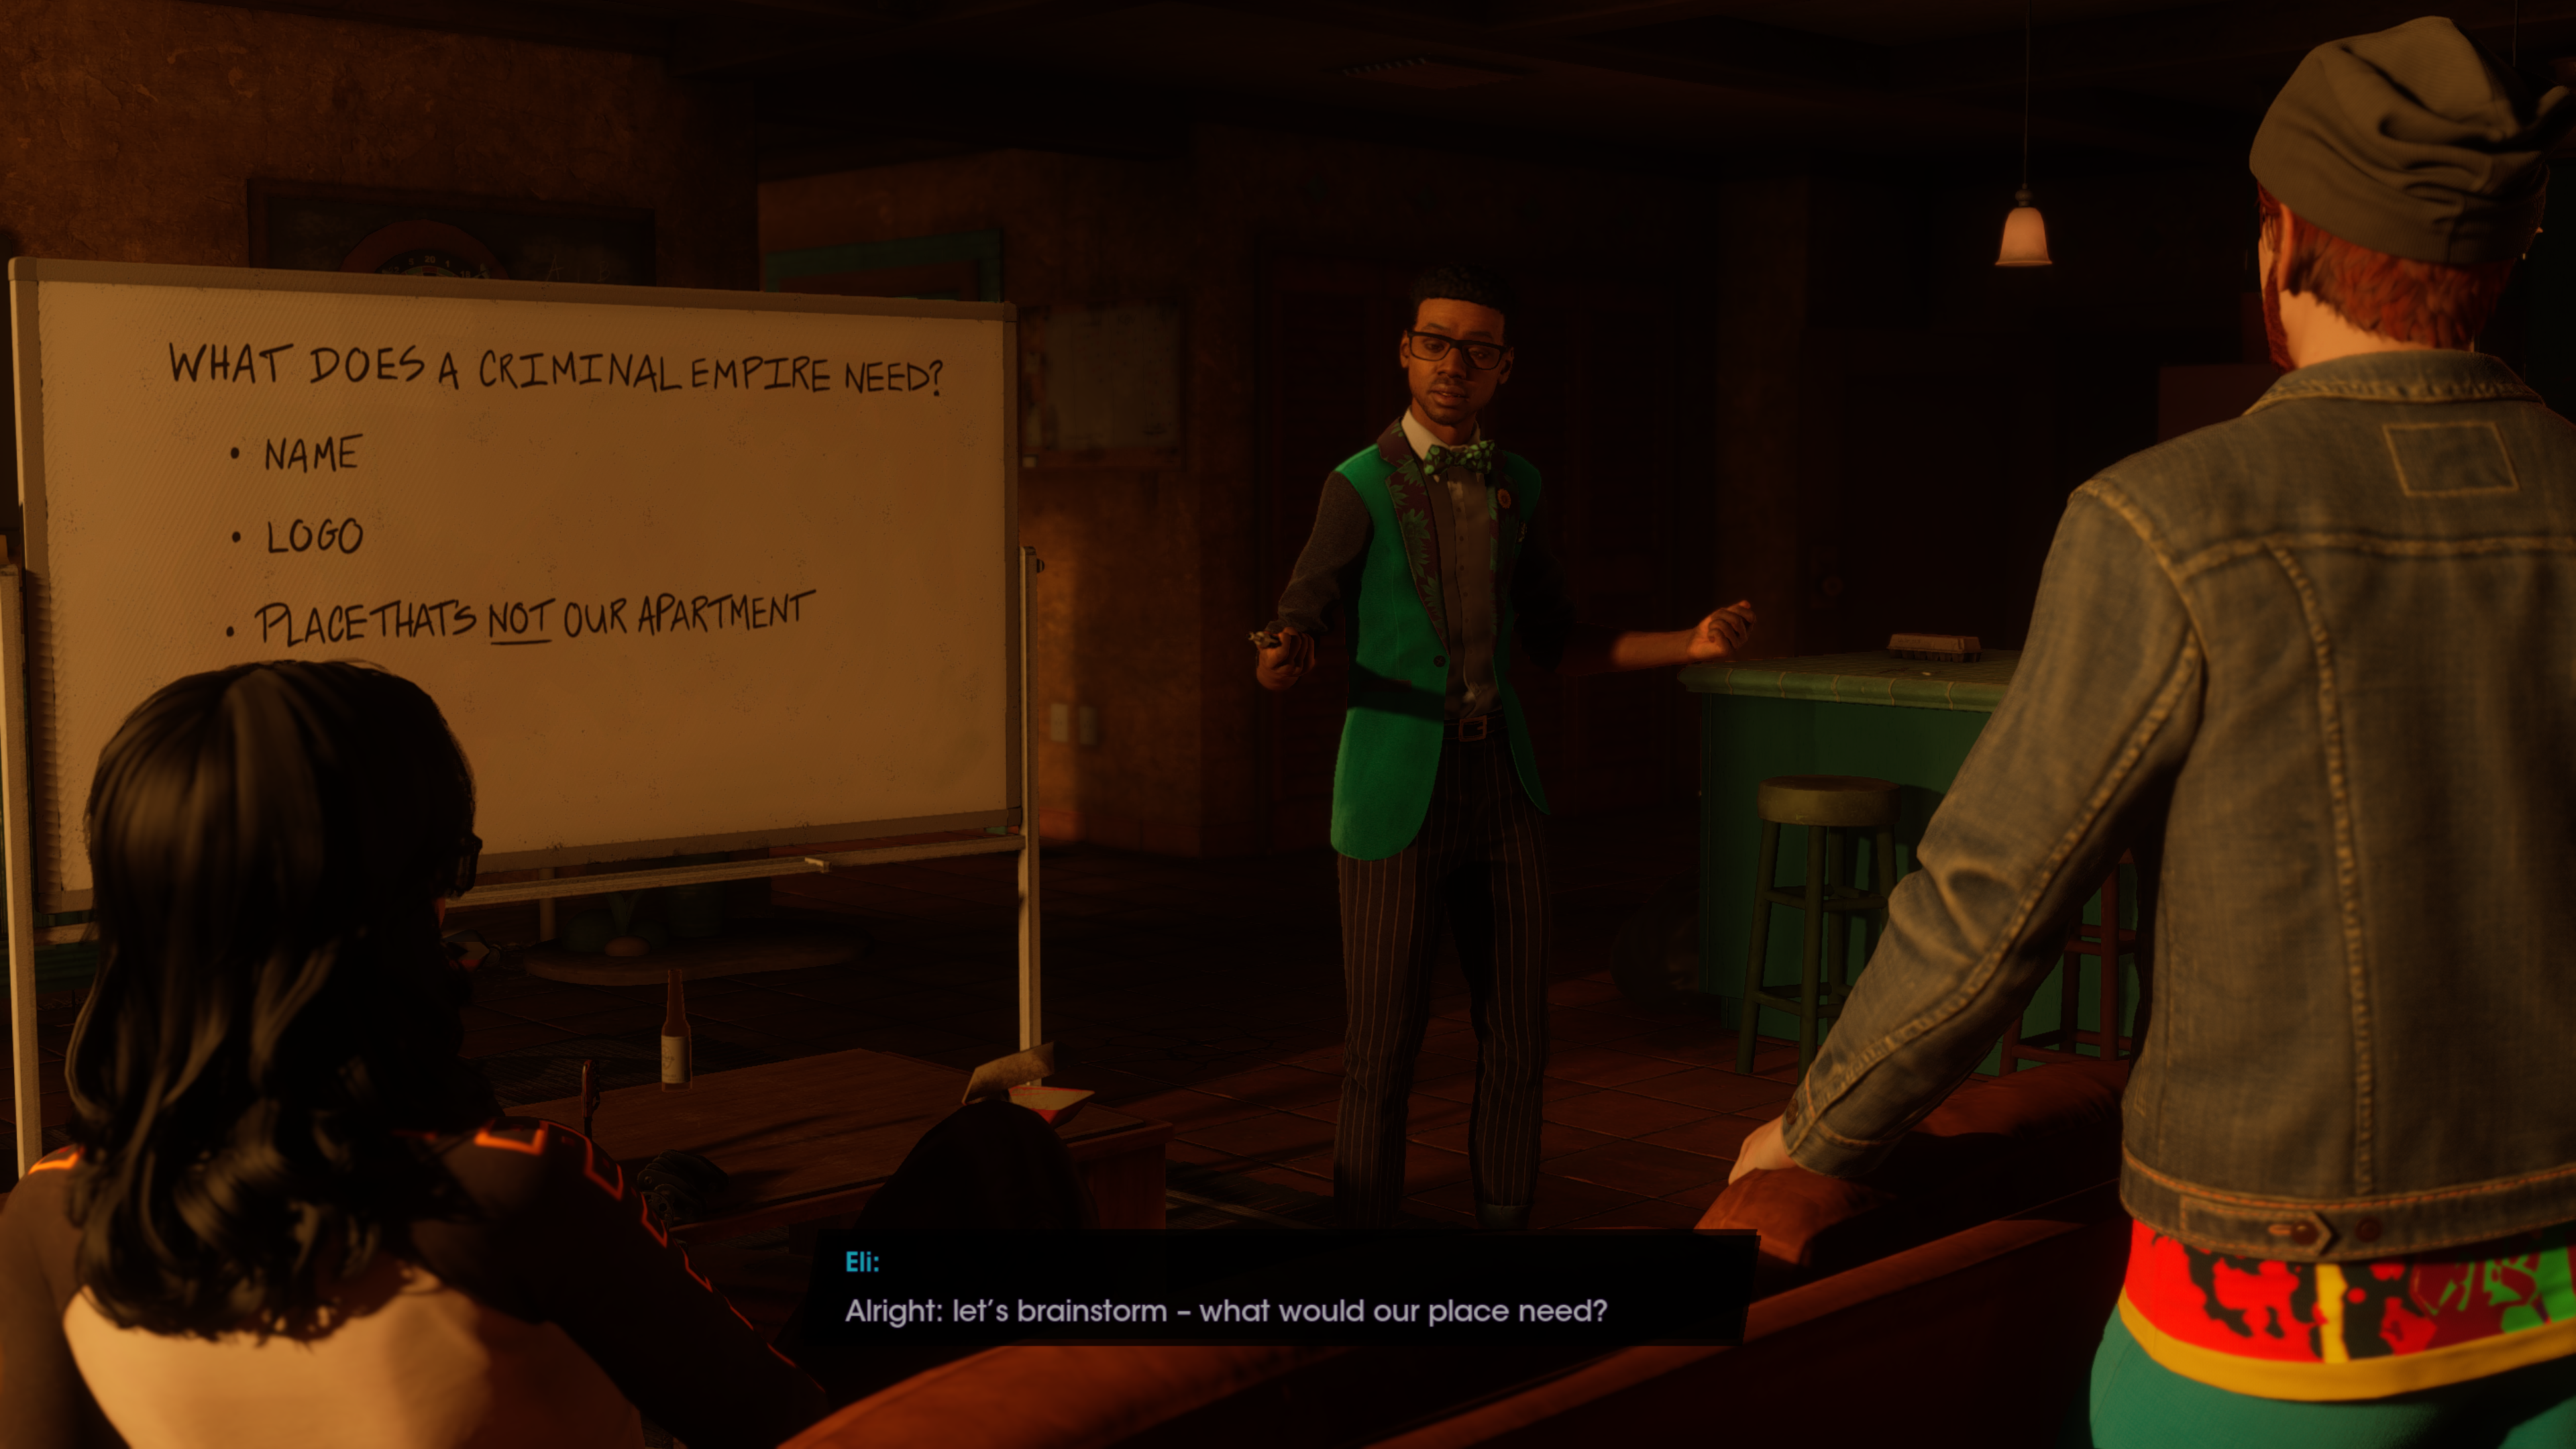 The Saints Row Reboot Needs to Let Me Be a Scumbag - The Escapist